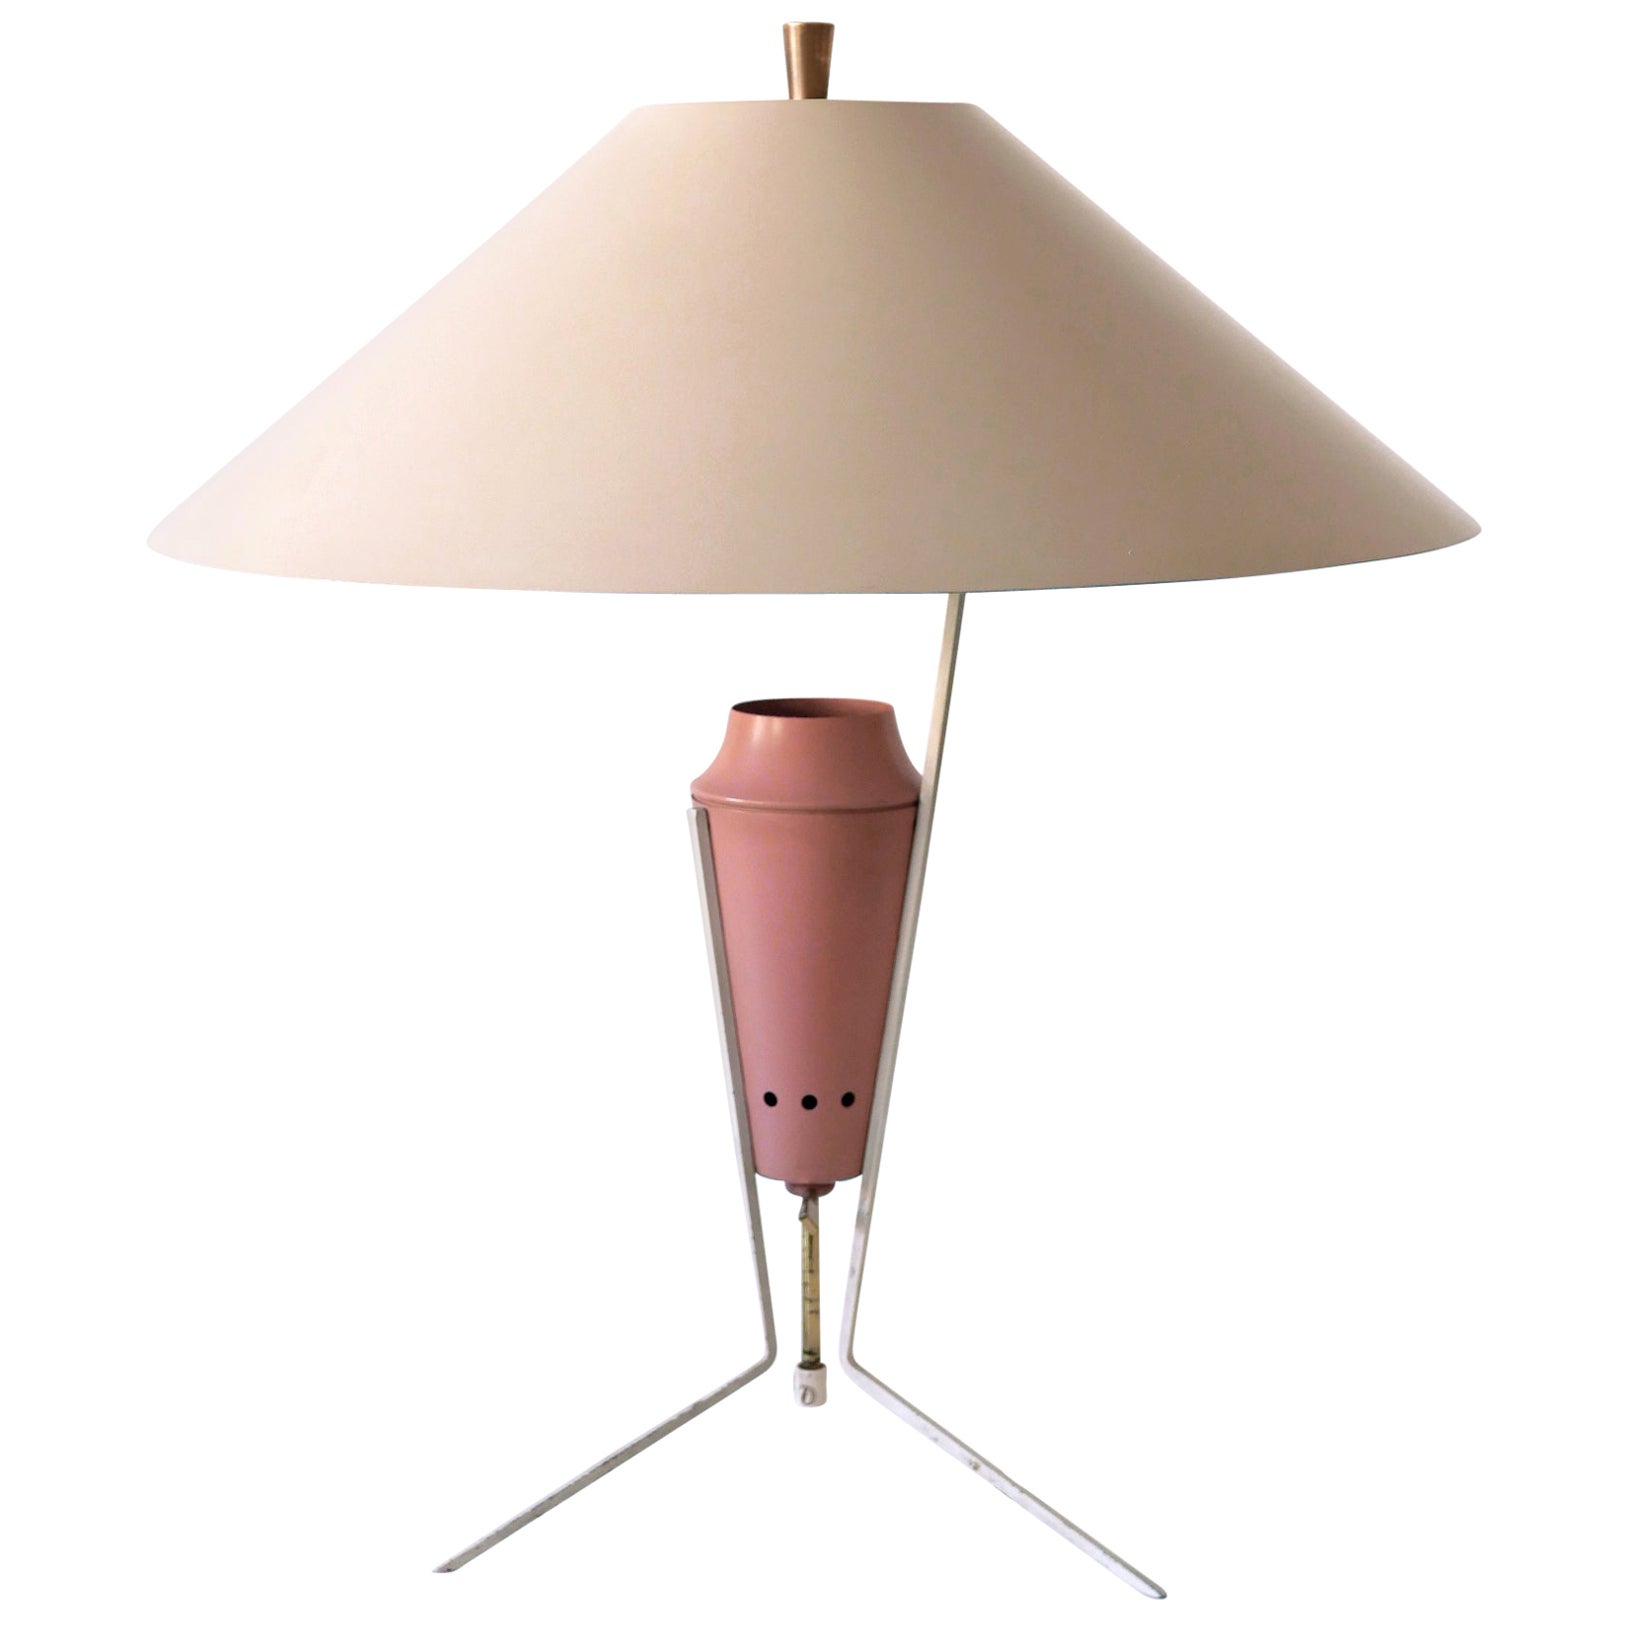 Exceptional Large & Elegant Mid Century Modern Table Lamp Germany 1950s